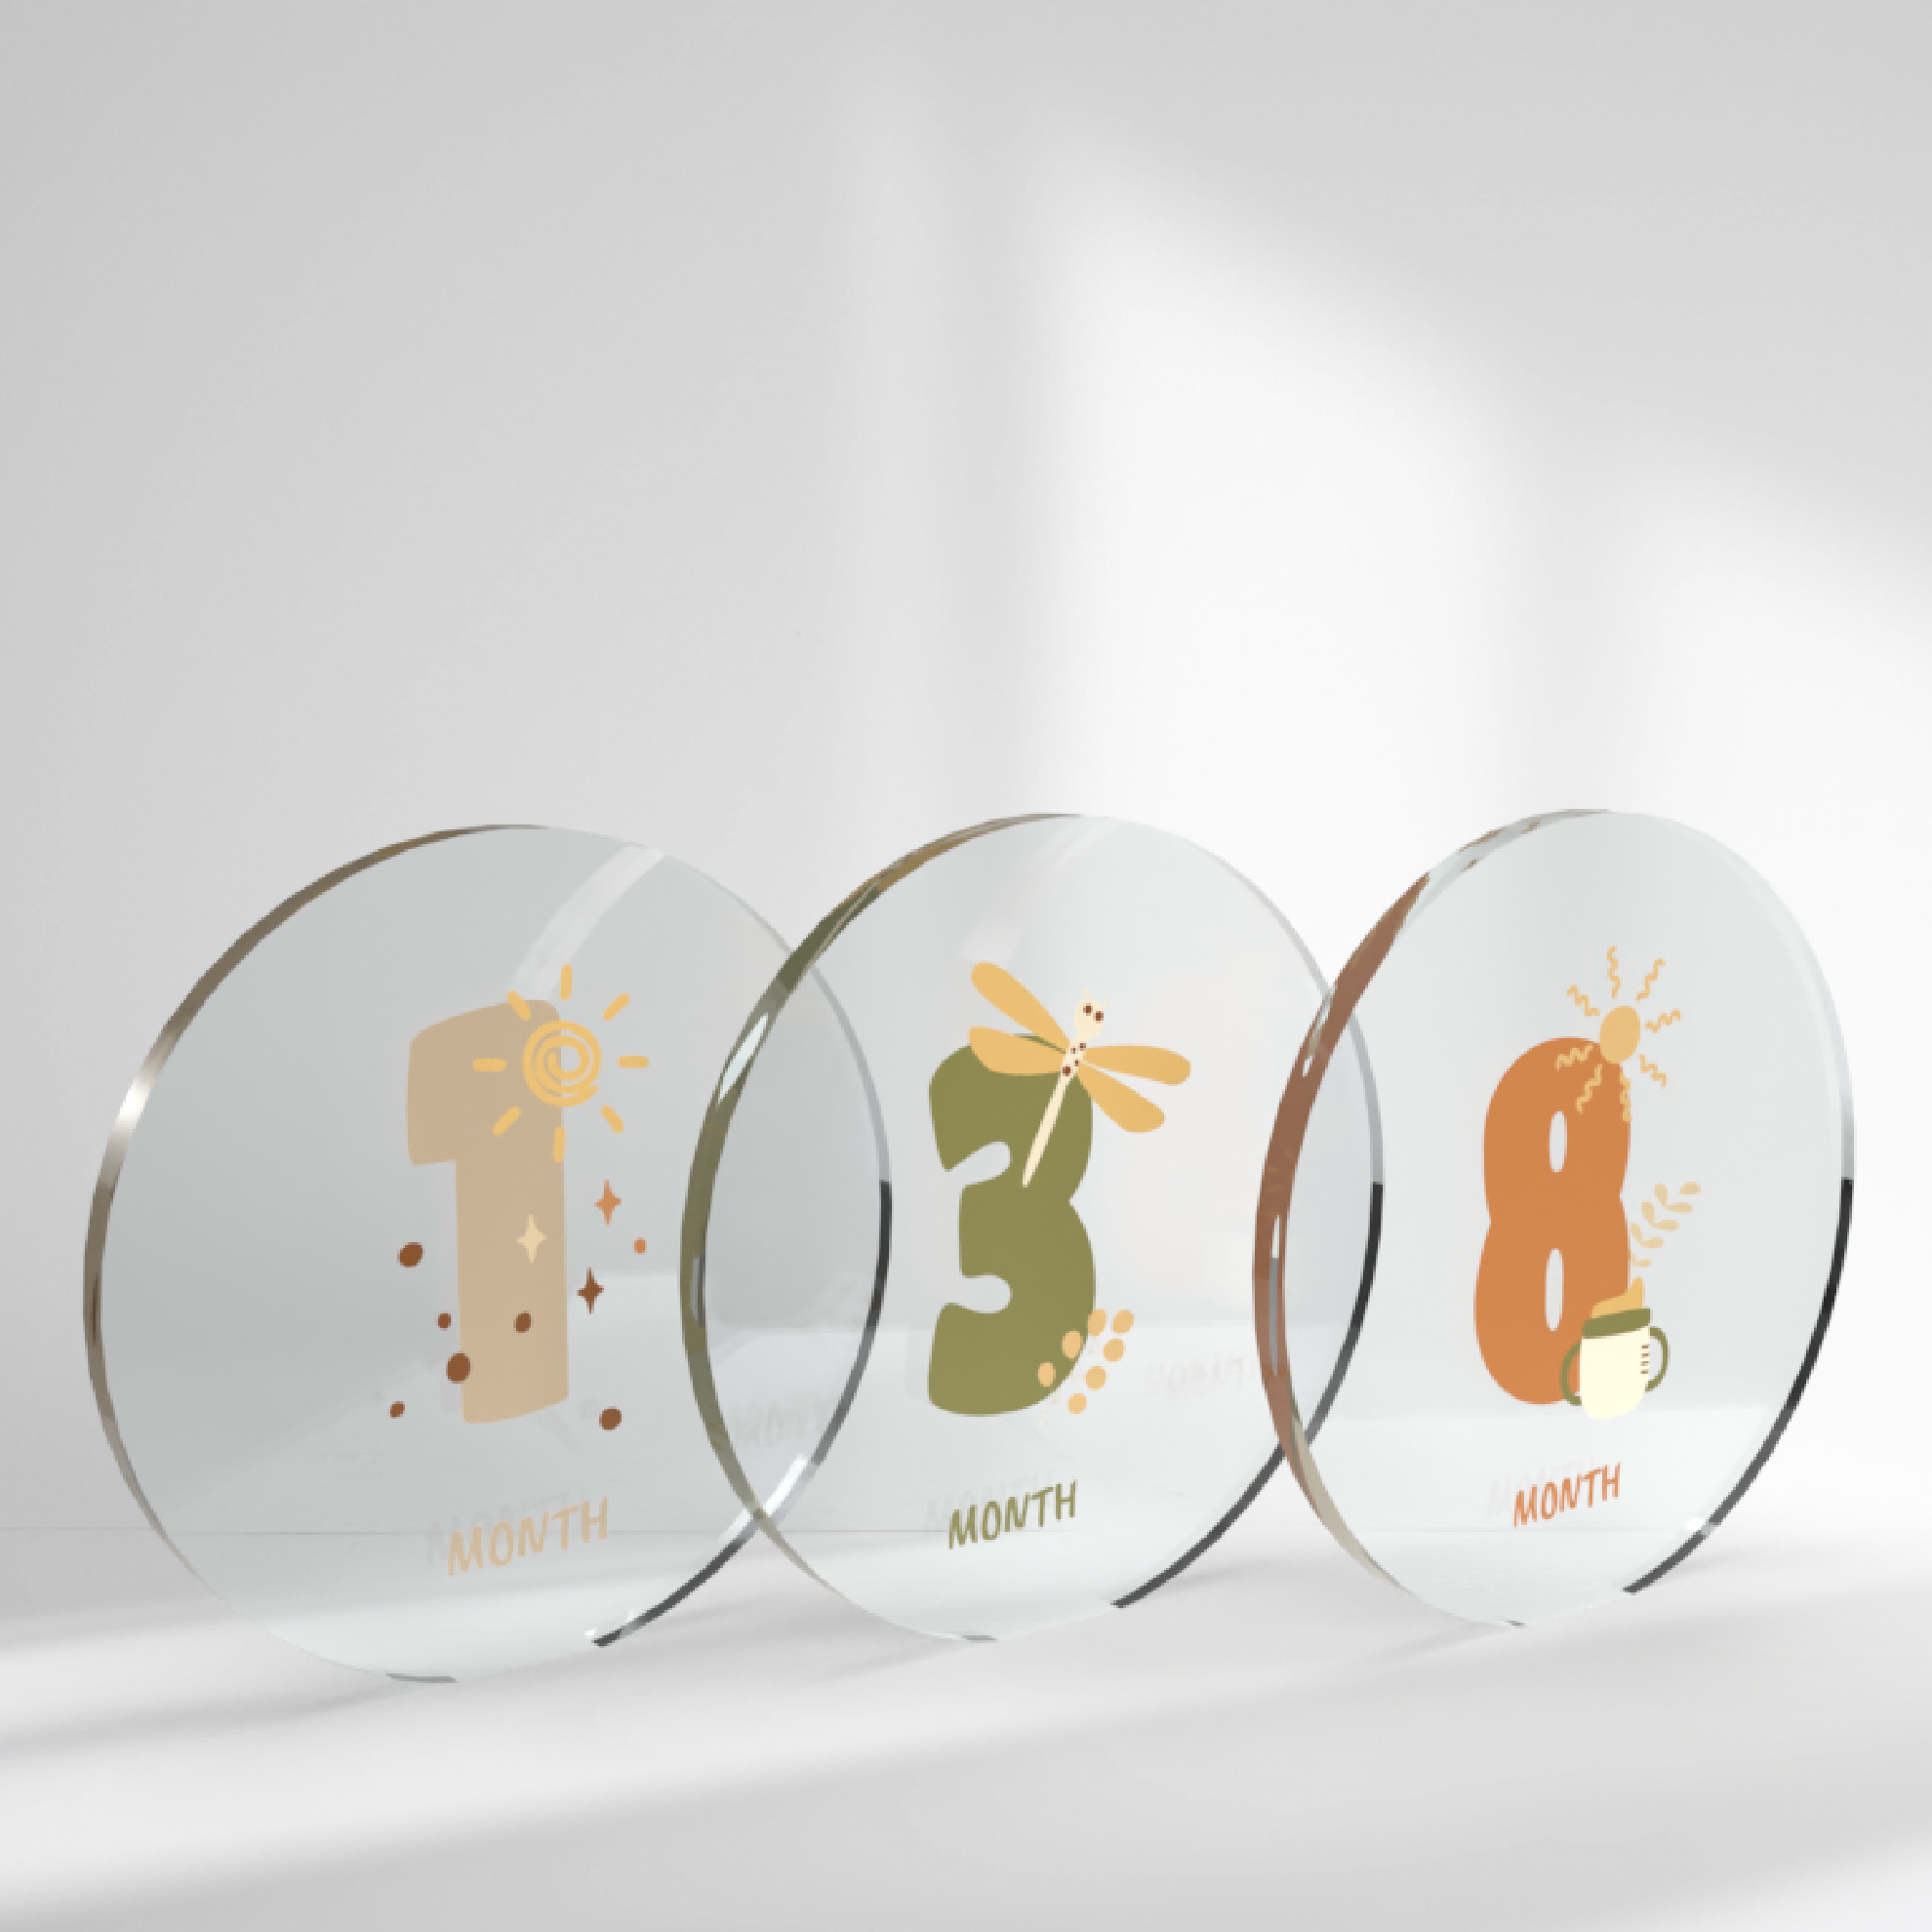 ACRYLIC BABY MILESTONE DISCS WITH PAINT AND GOLD FOIL